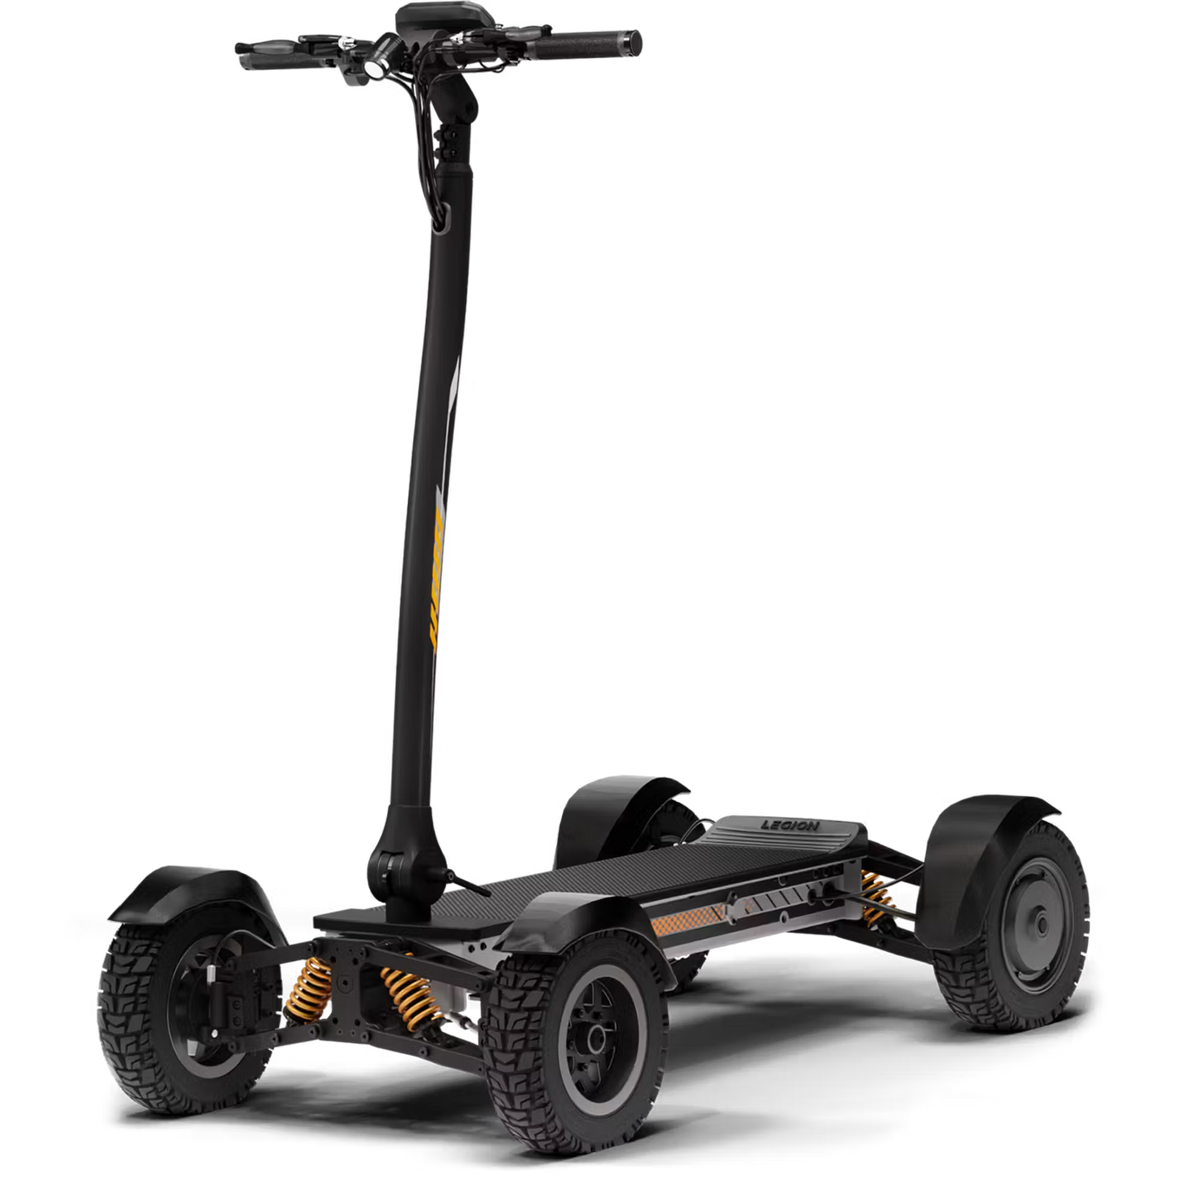 CycleBoard X-Quad 3000 All-Terrain Electric Scooter — Garage Direct